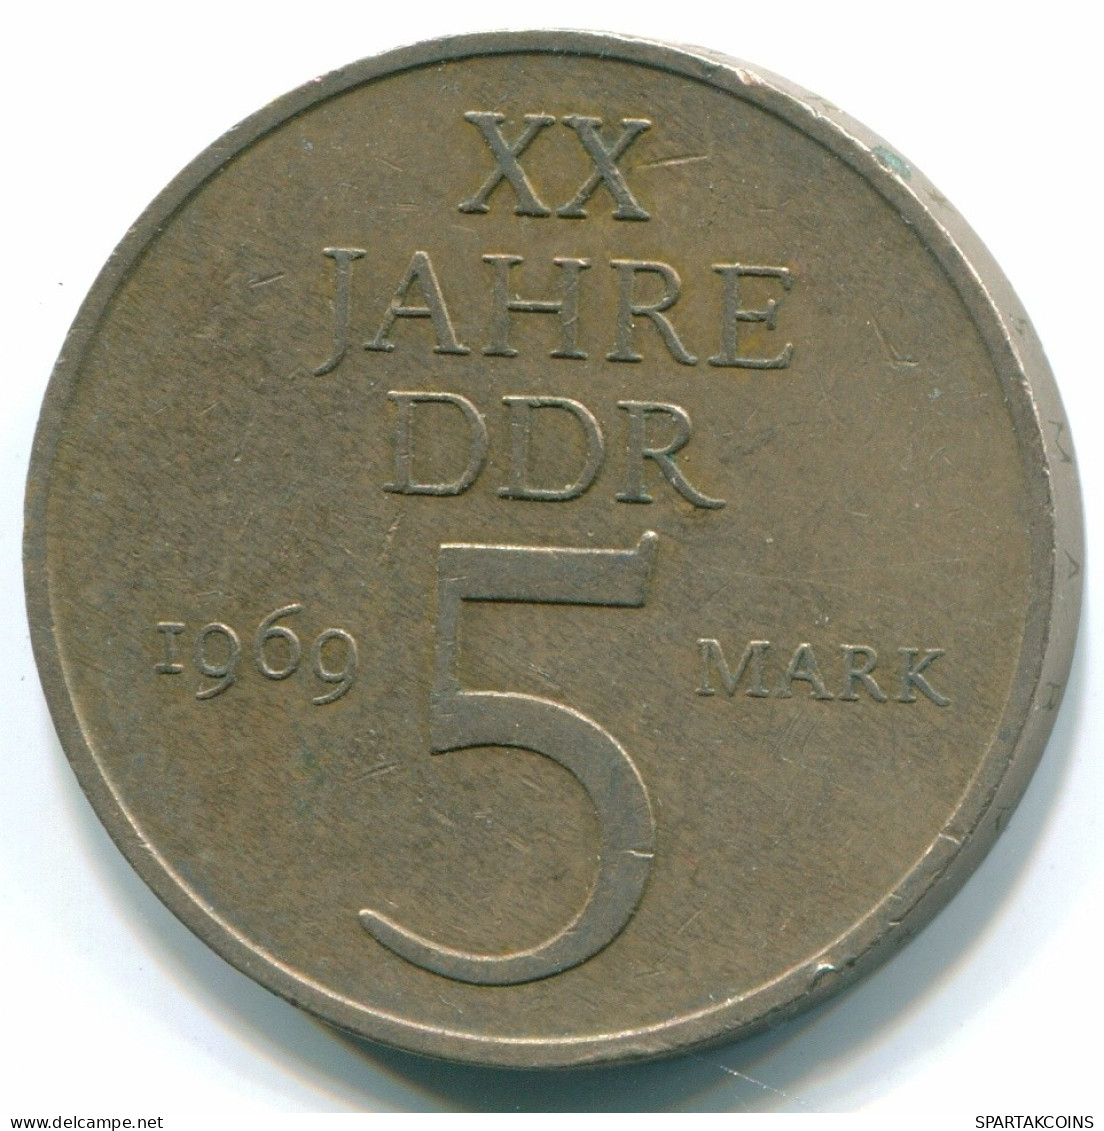 5 MARK 1969 20TH ANNIVERSARY DDR EAST ALLEMAGNE Pièce GERMANY #DE10004.3.F.A - 5 Mark